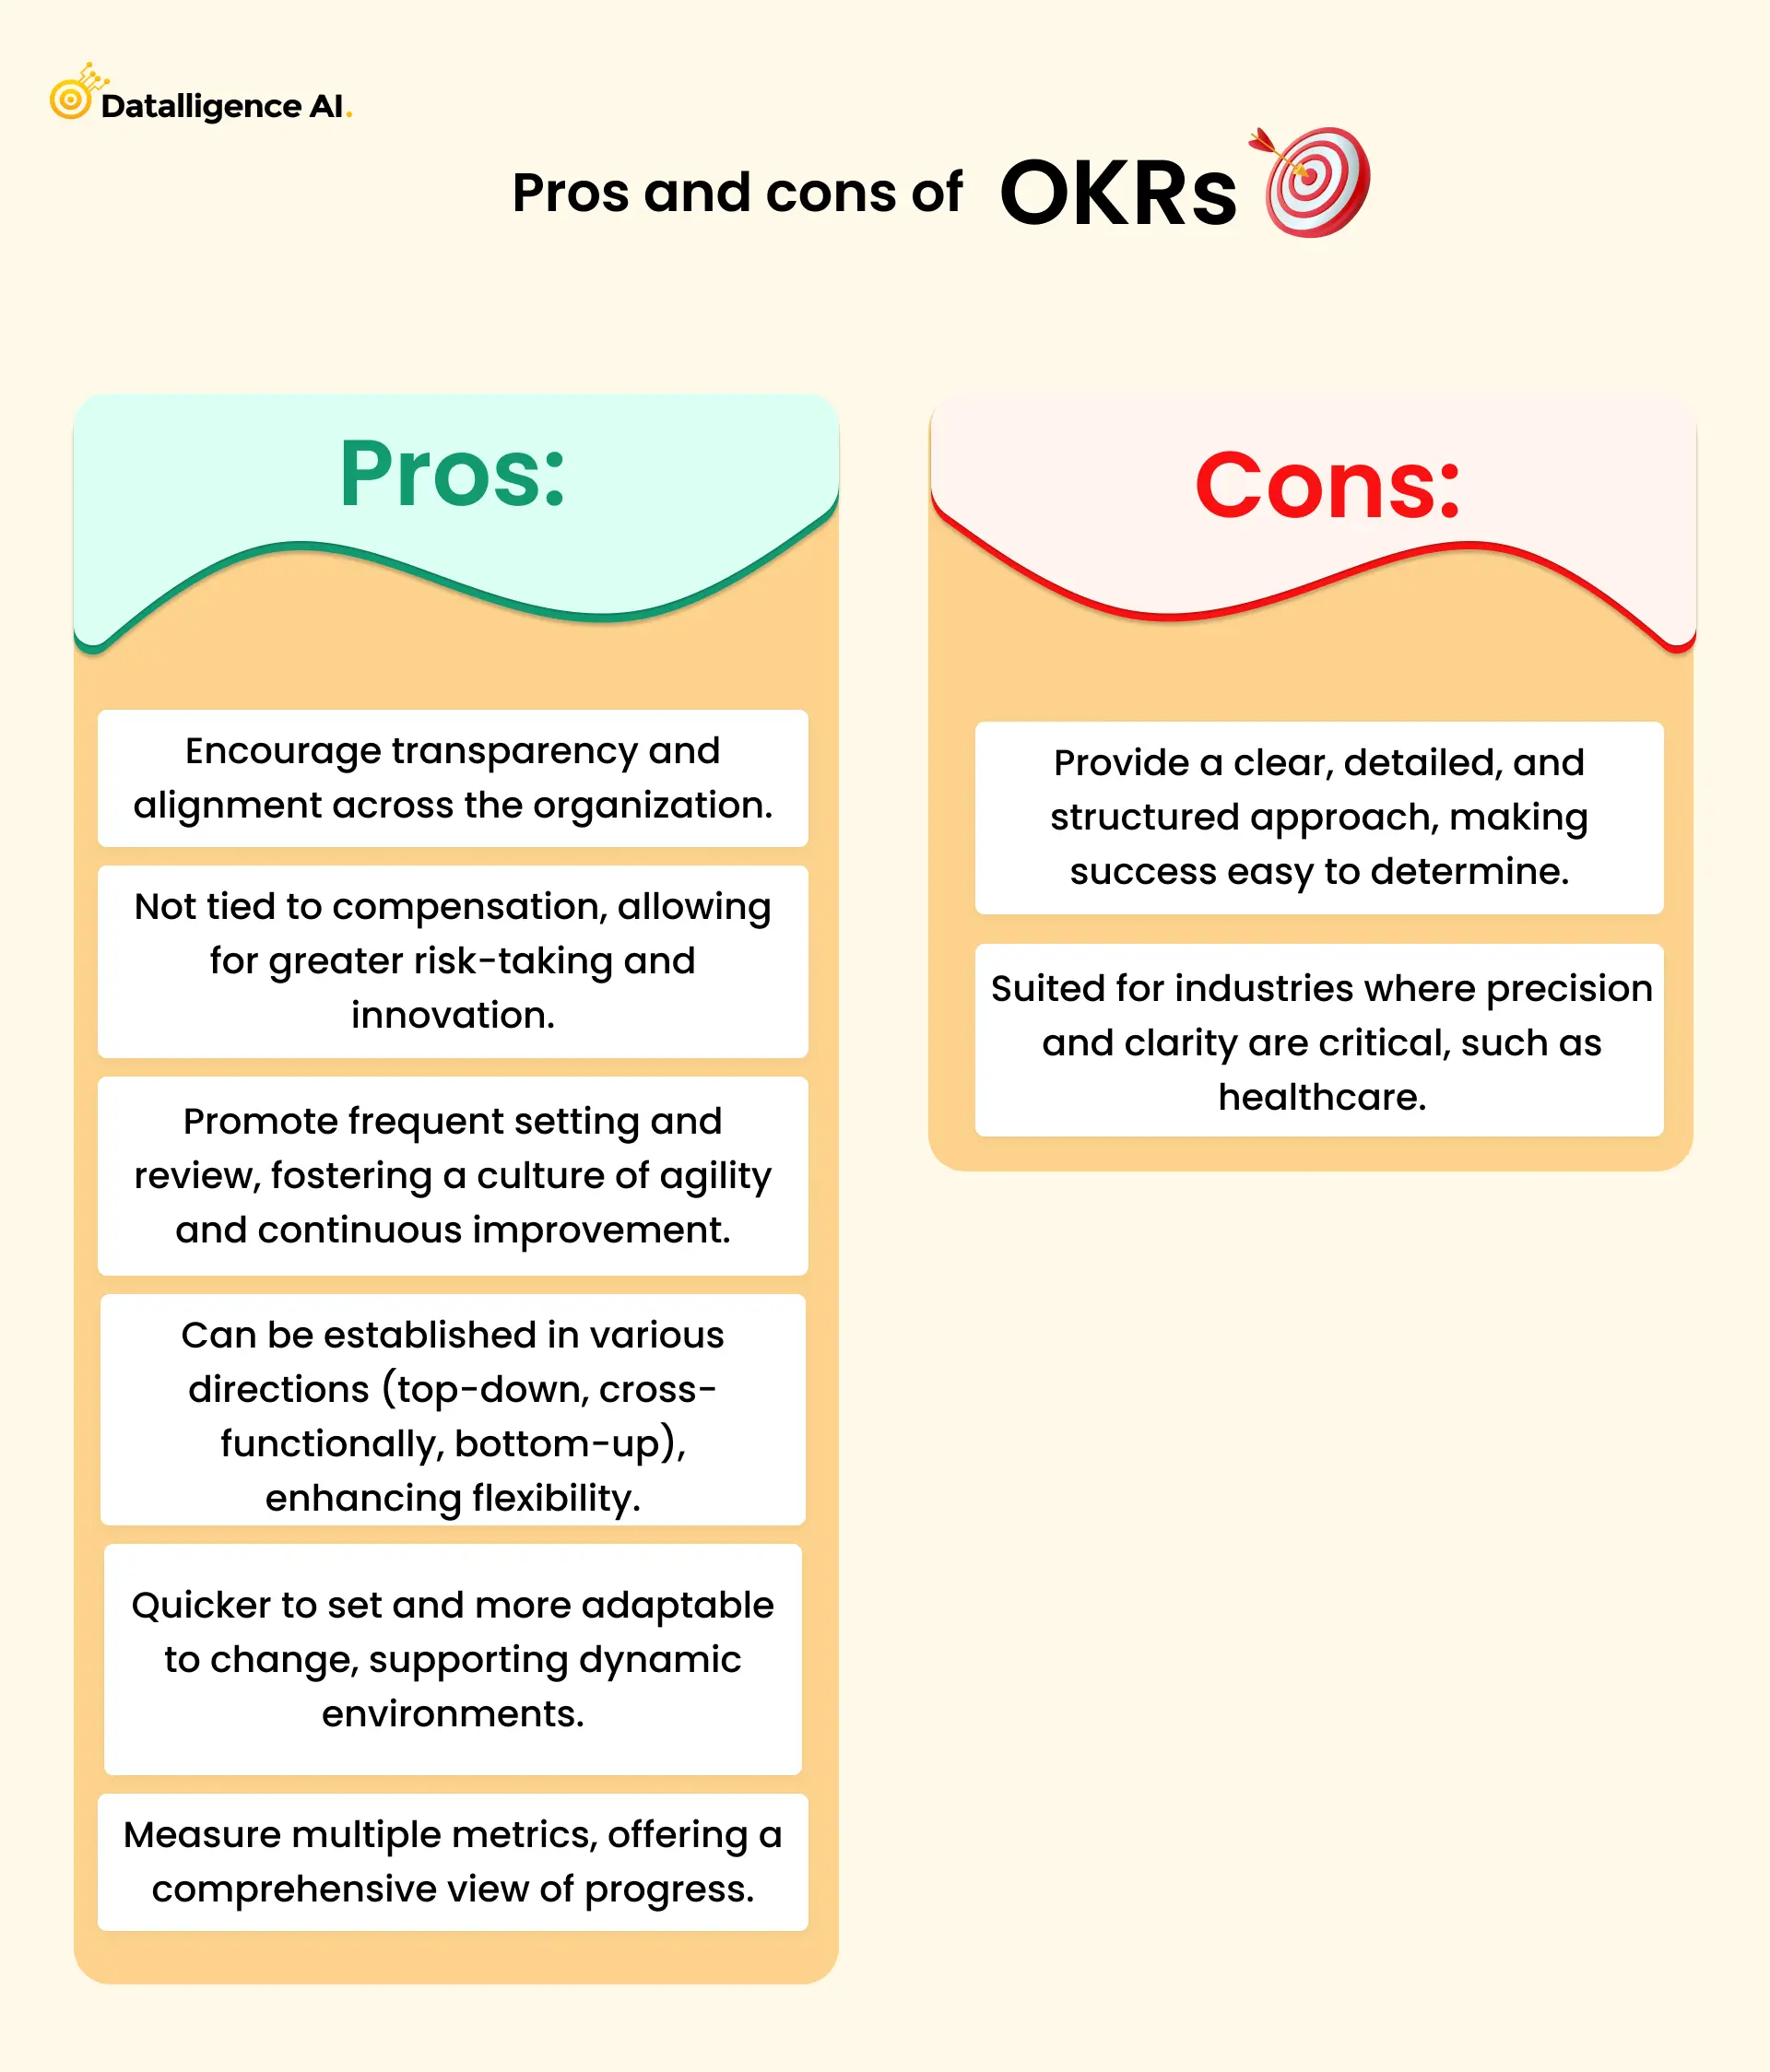 Pros and cons of OKRs